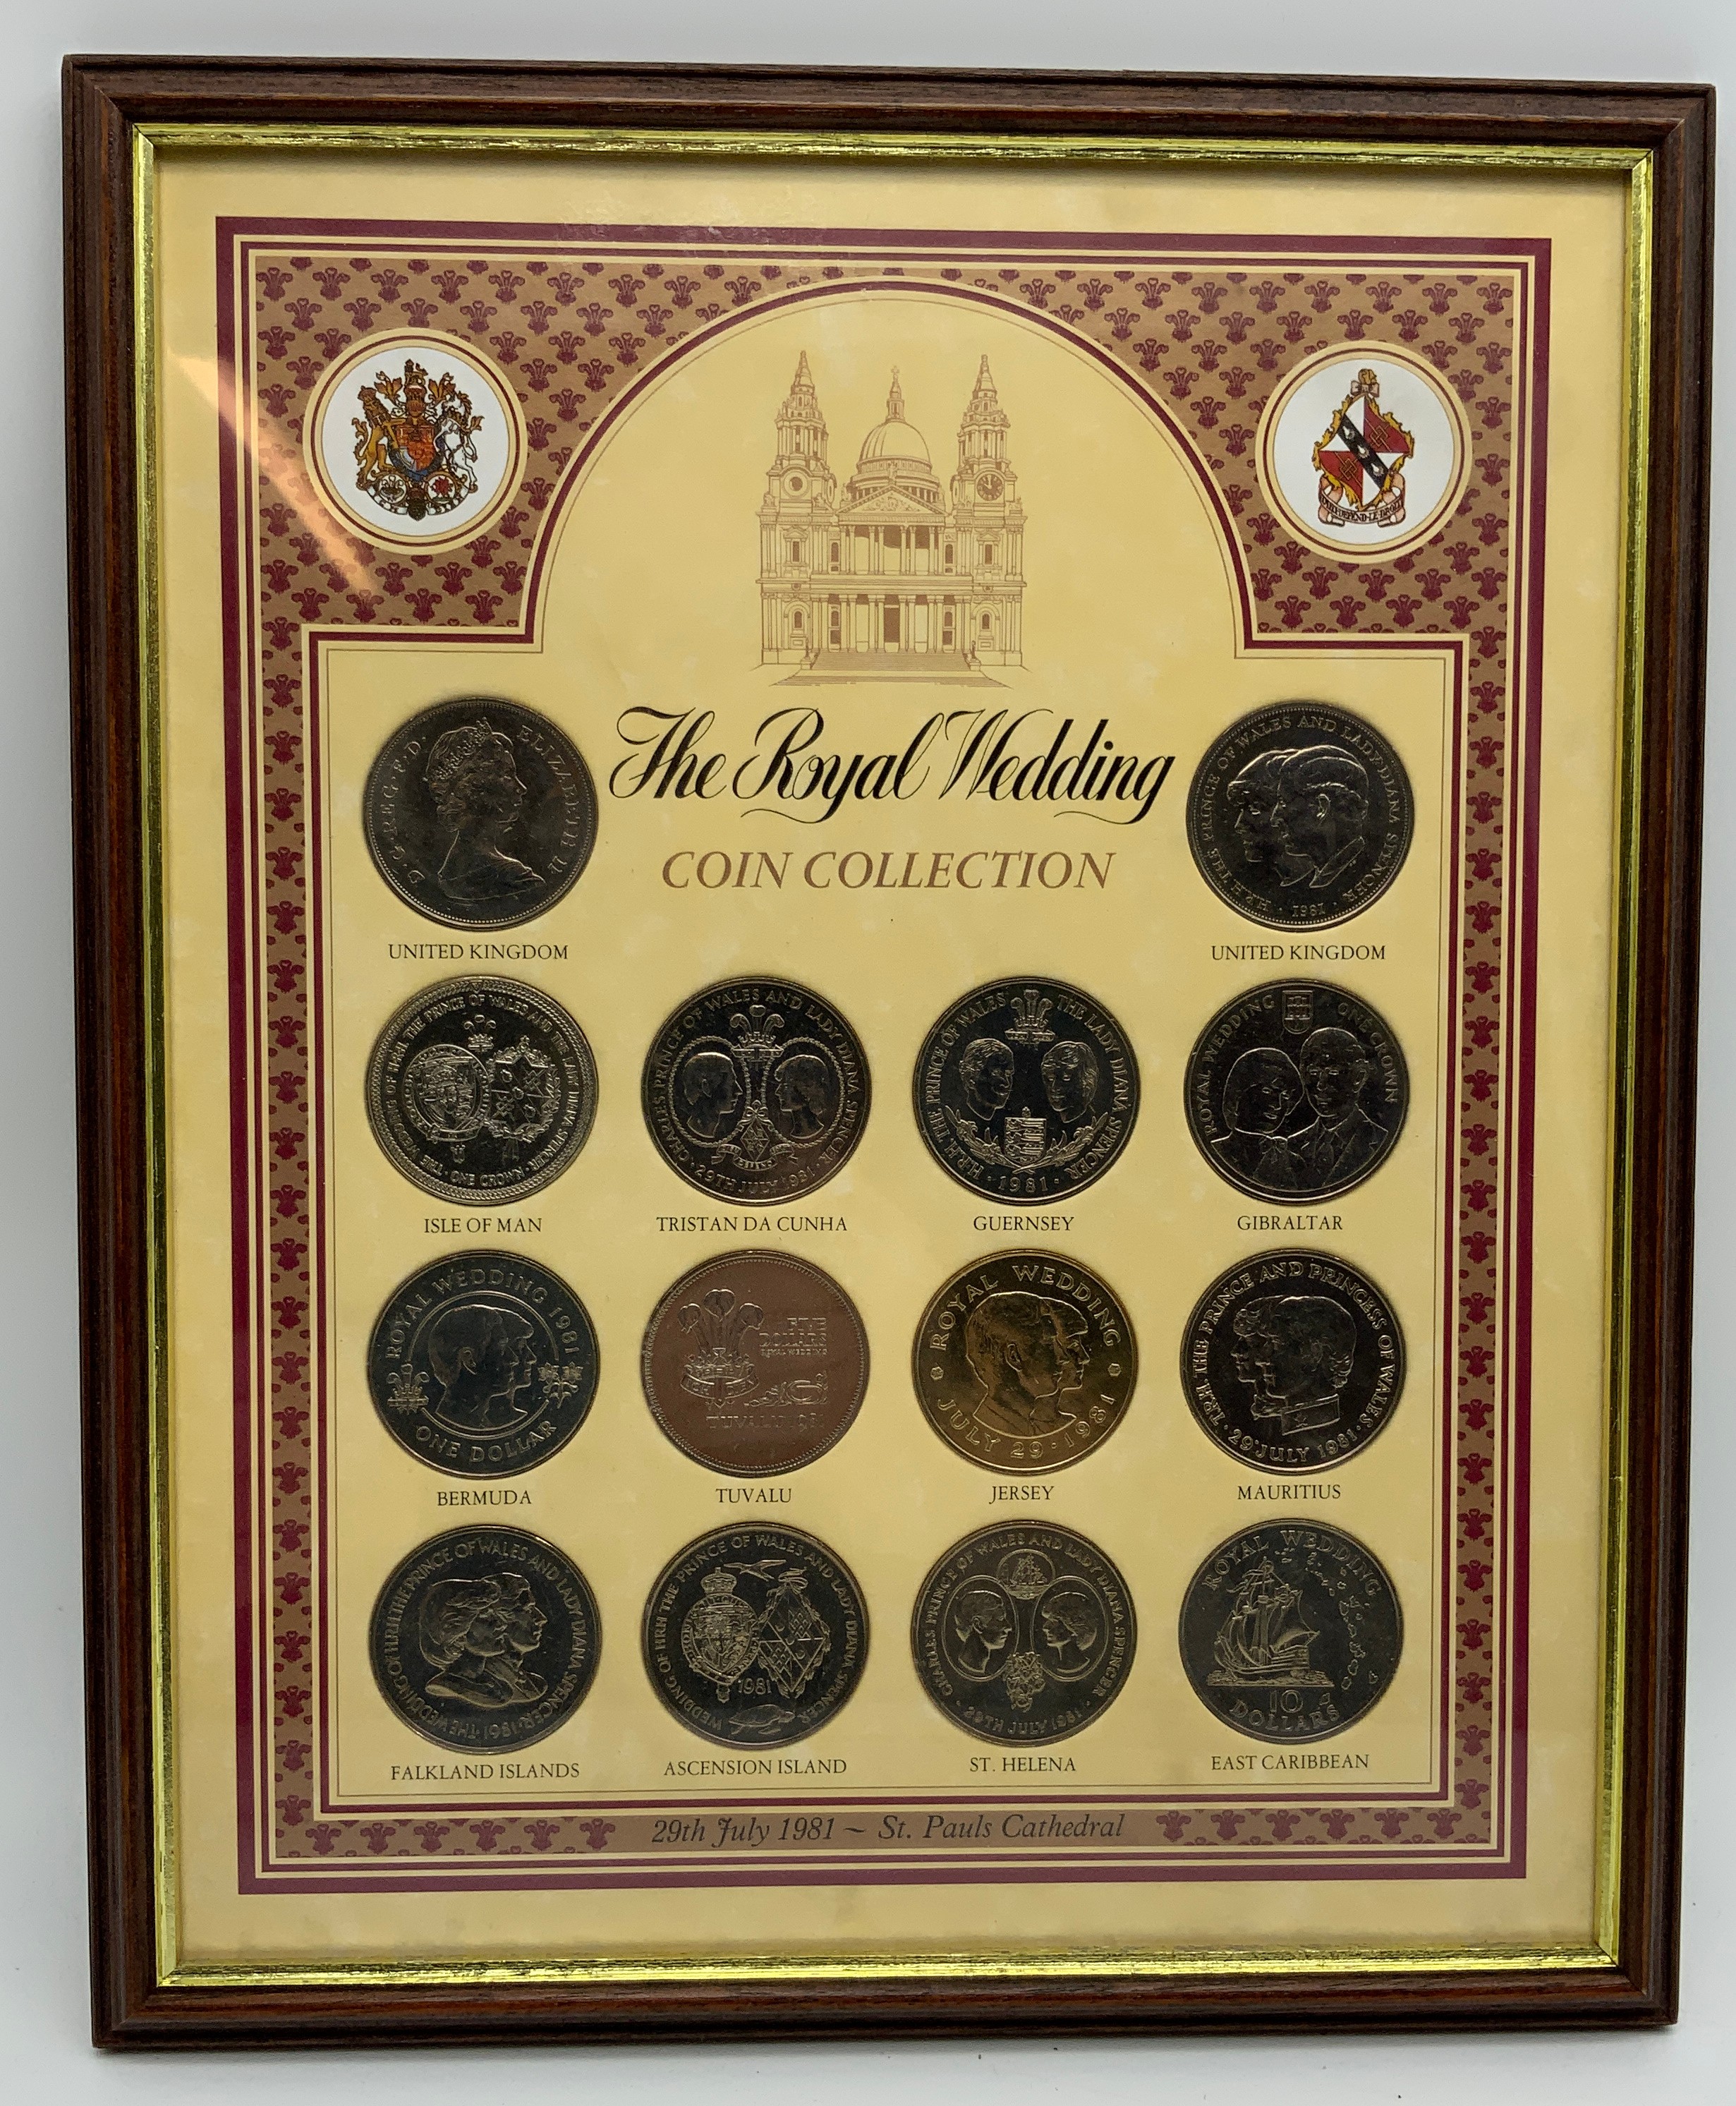 FRAMED 29TH JULY 1981 ST. PAUL'S CATHEDRAL THE ROYAL WEDDING COIN COLLECTION